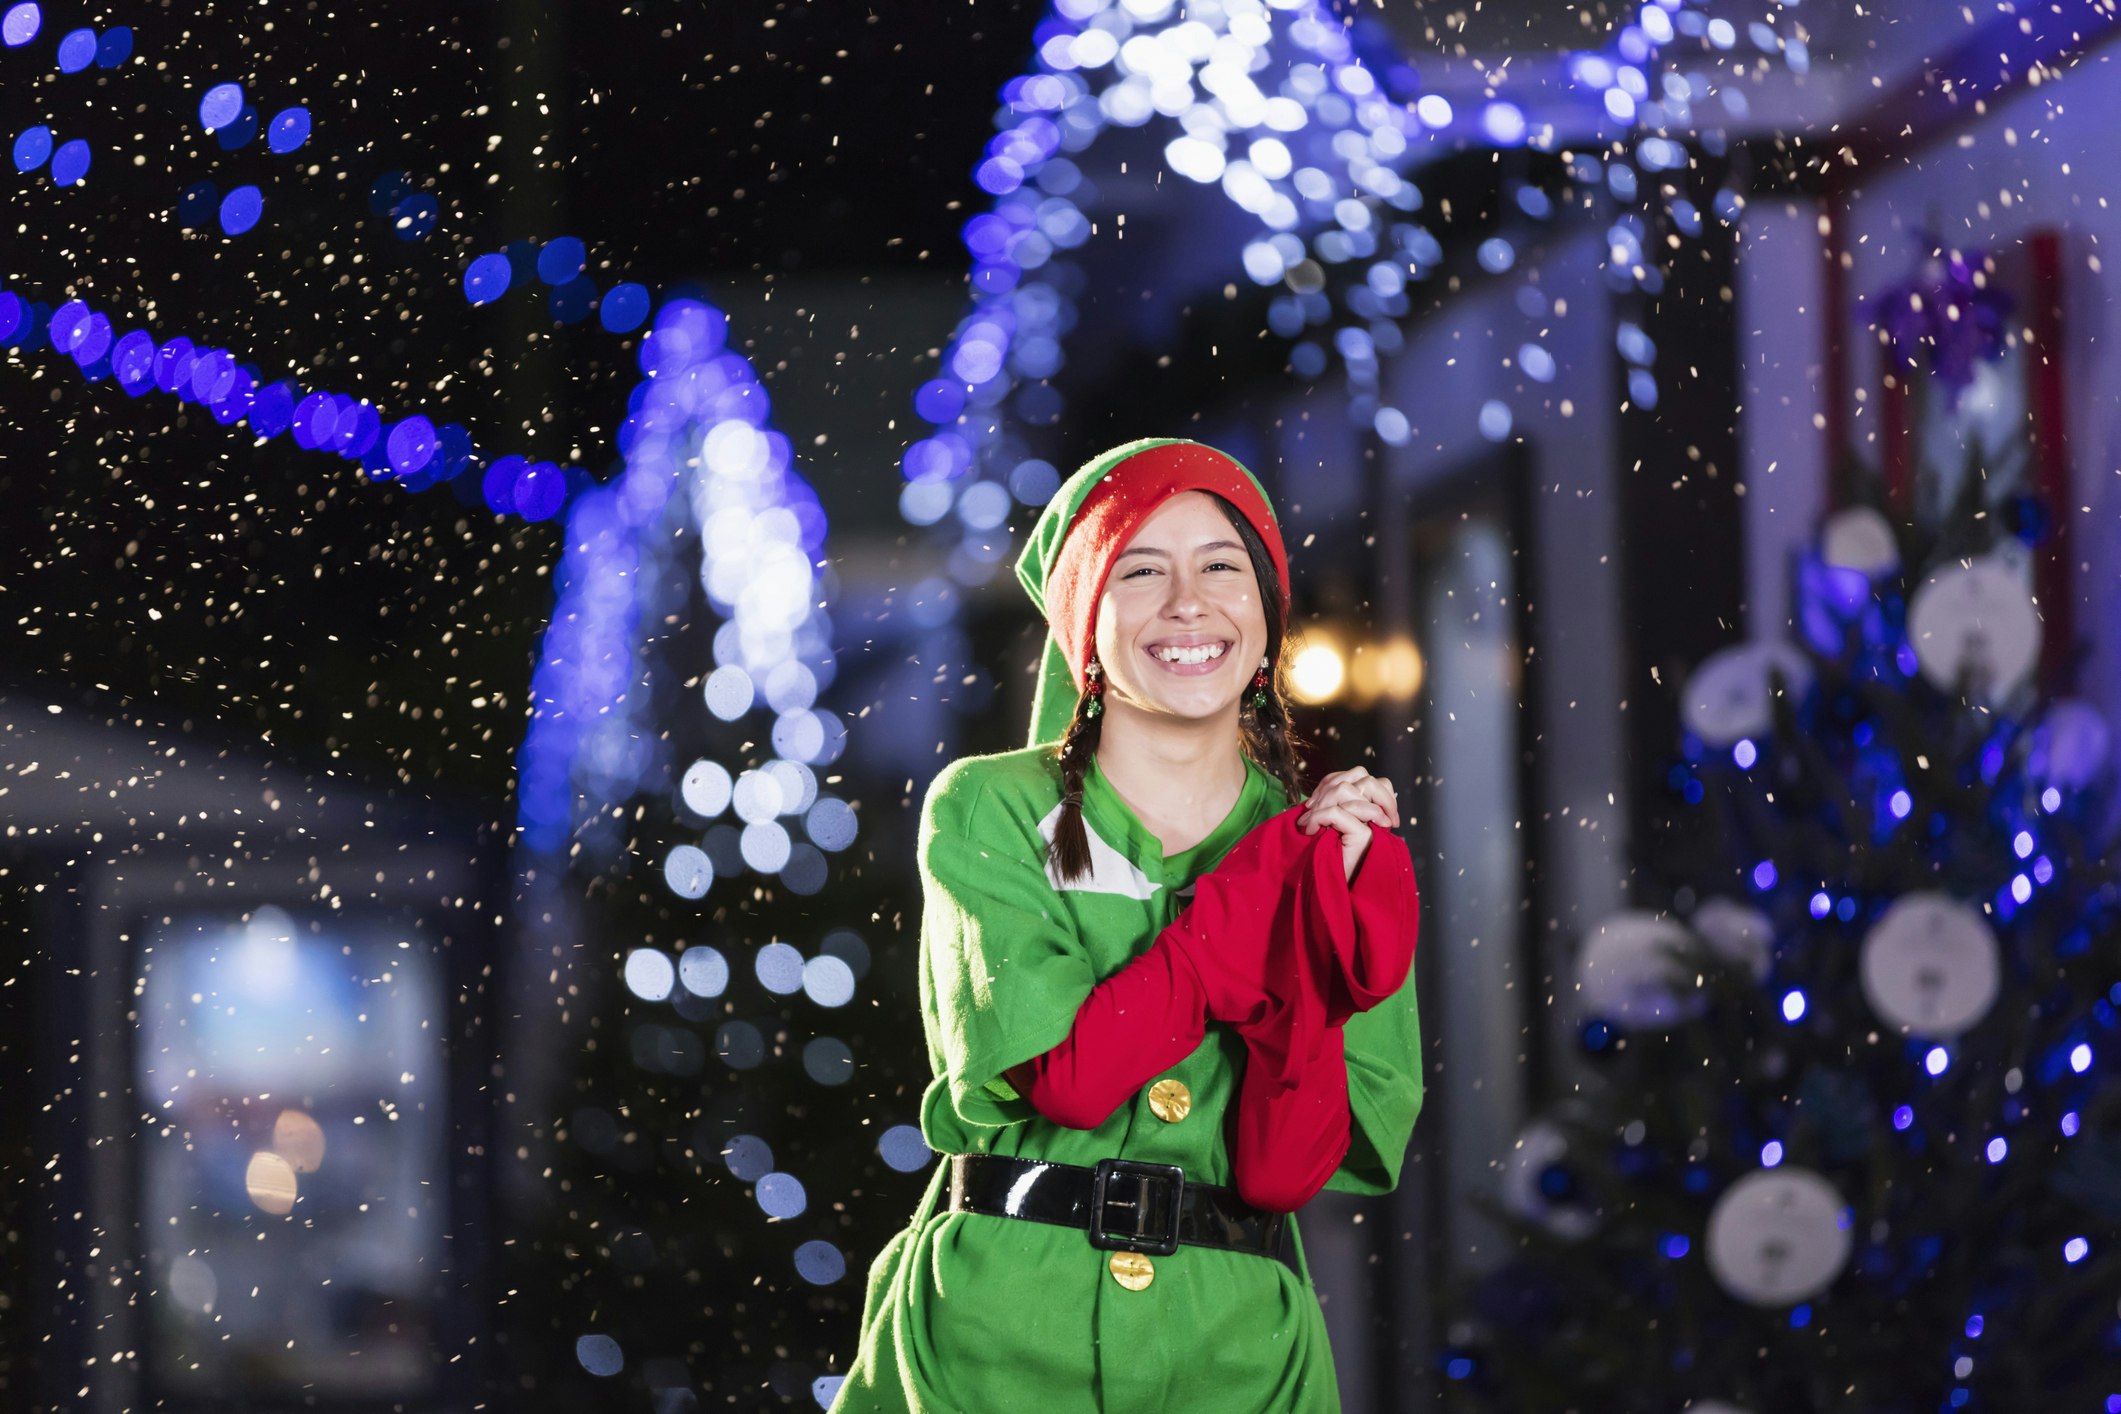 A picture of a girl dressed as one of Santa's elves with twinkling lights around her